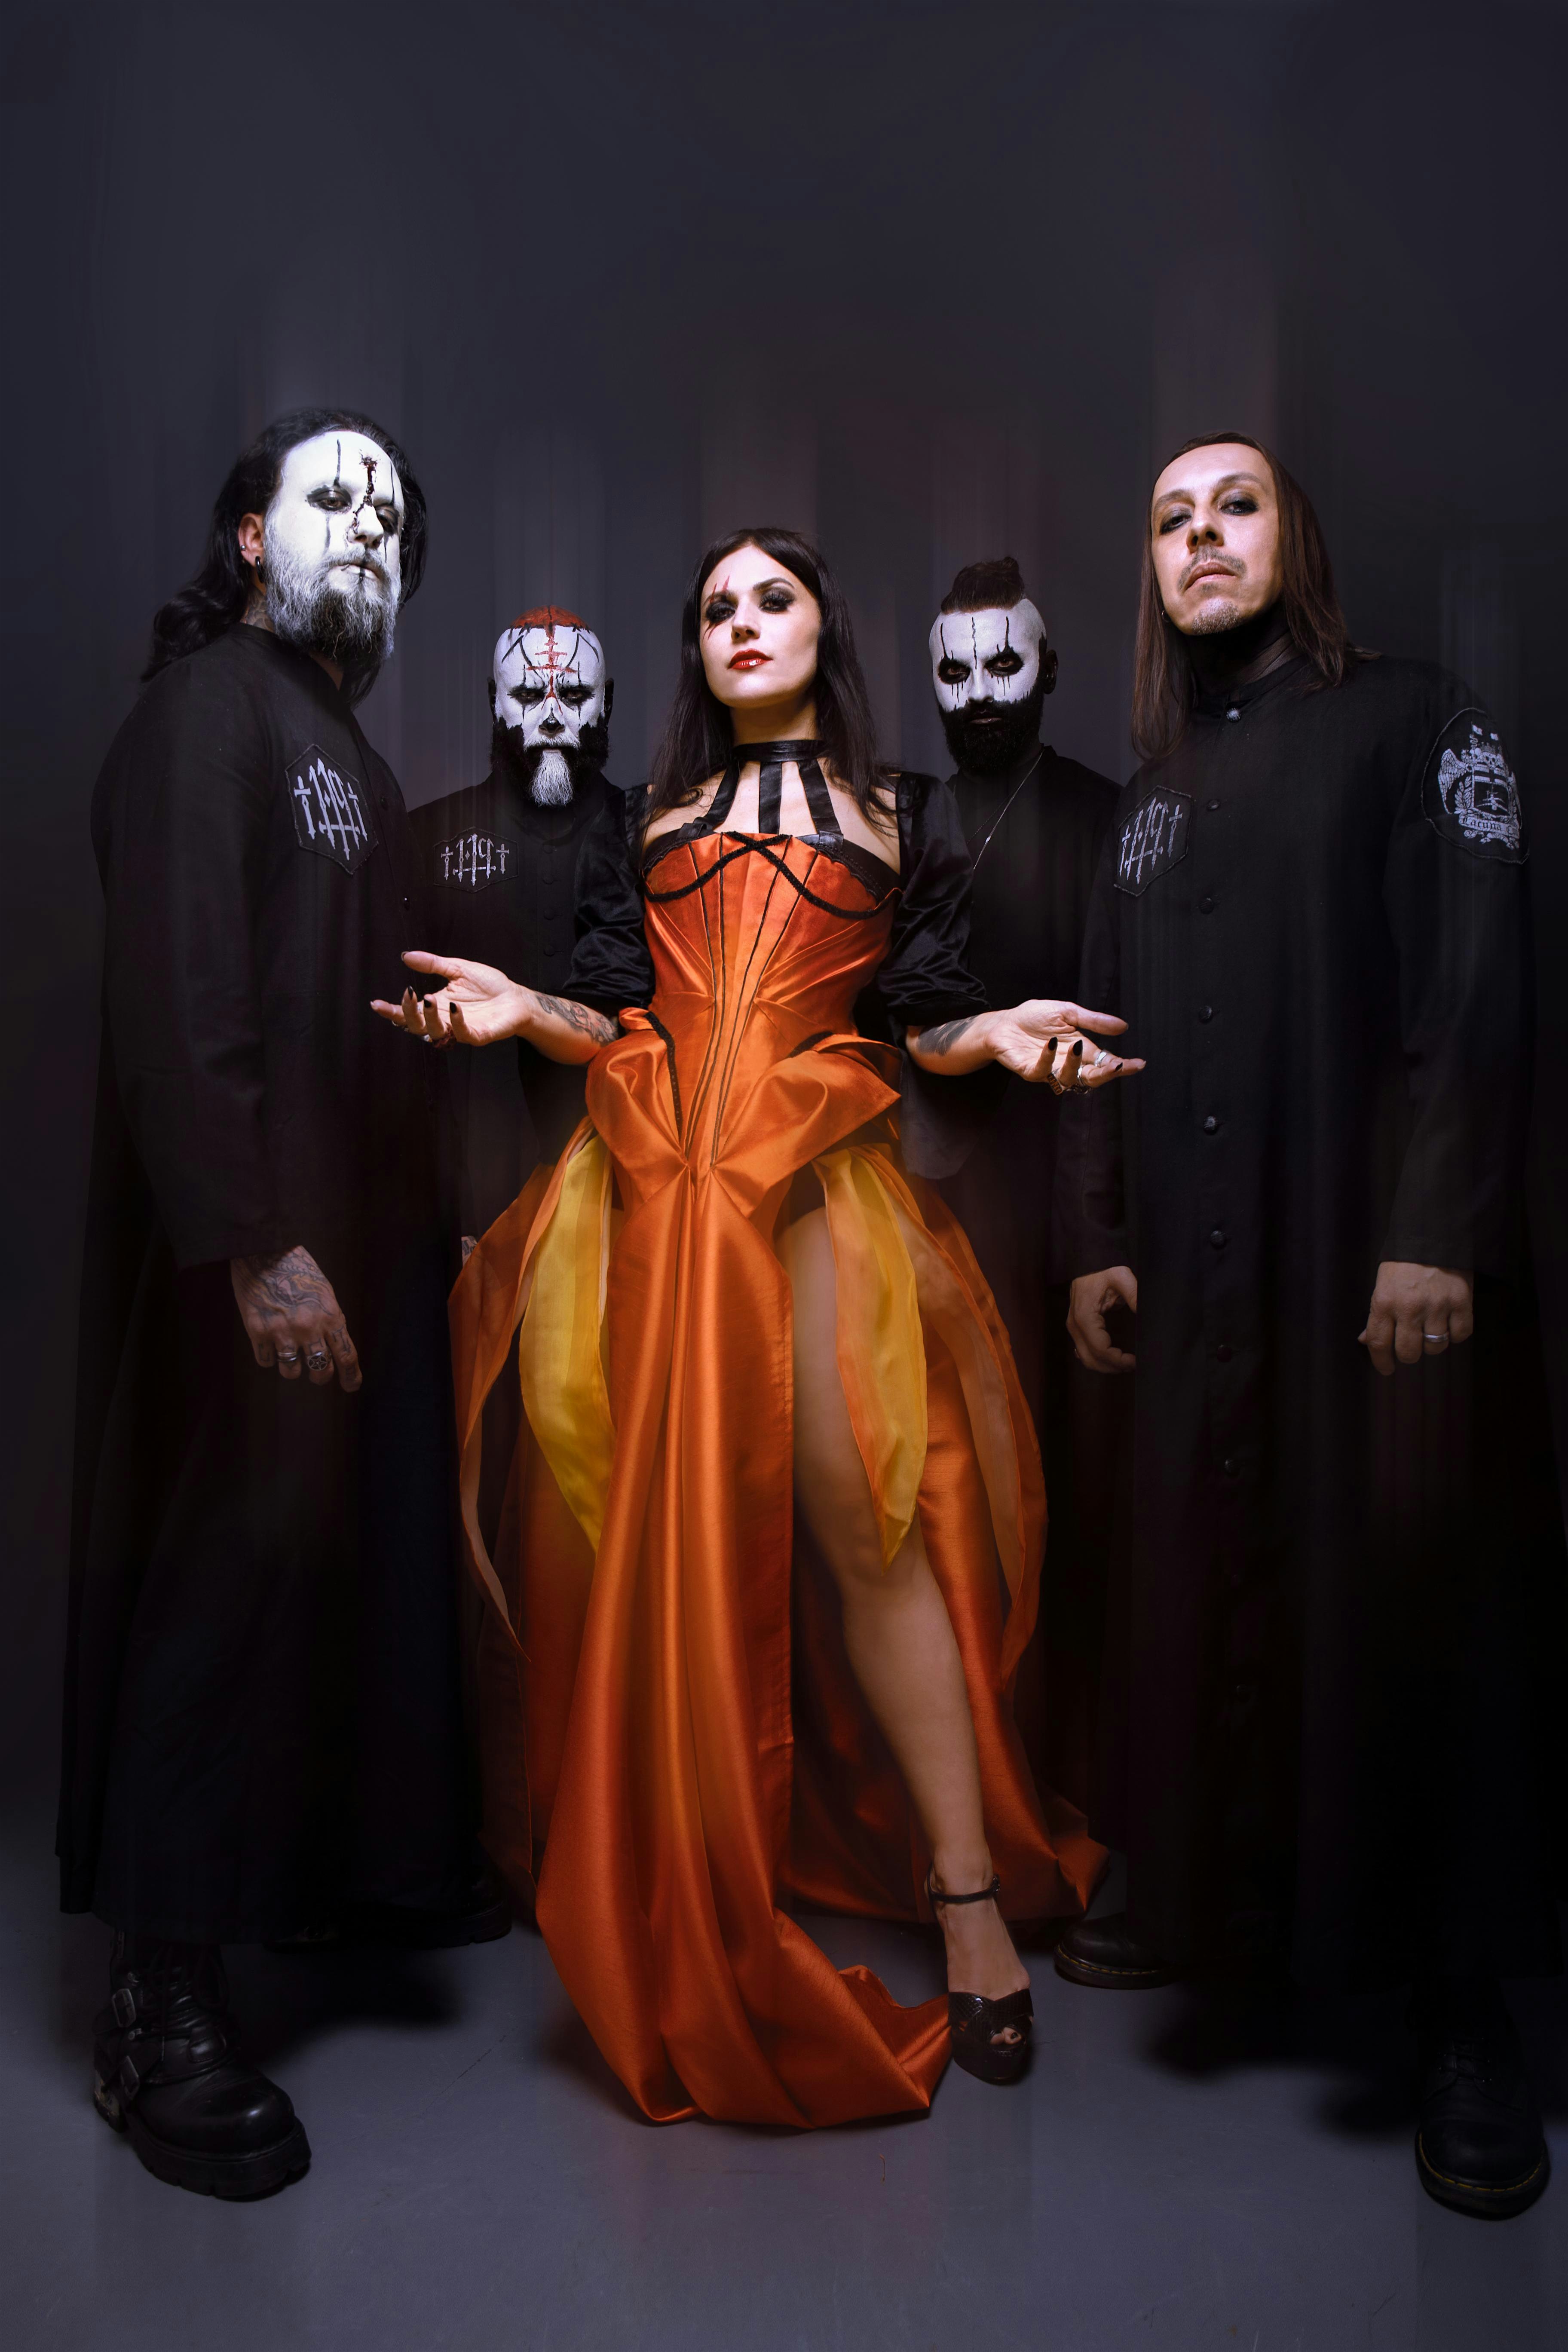 Lacuna Coil, God Forbid, and Lions at the Gate in St. Petersburg at Jannus Live